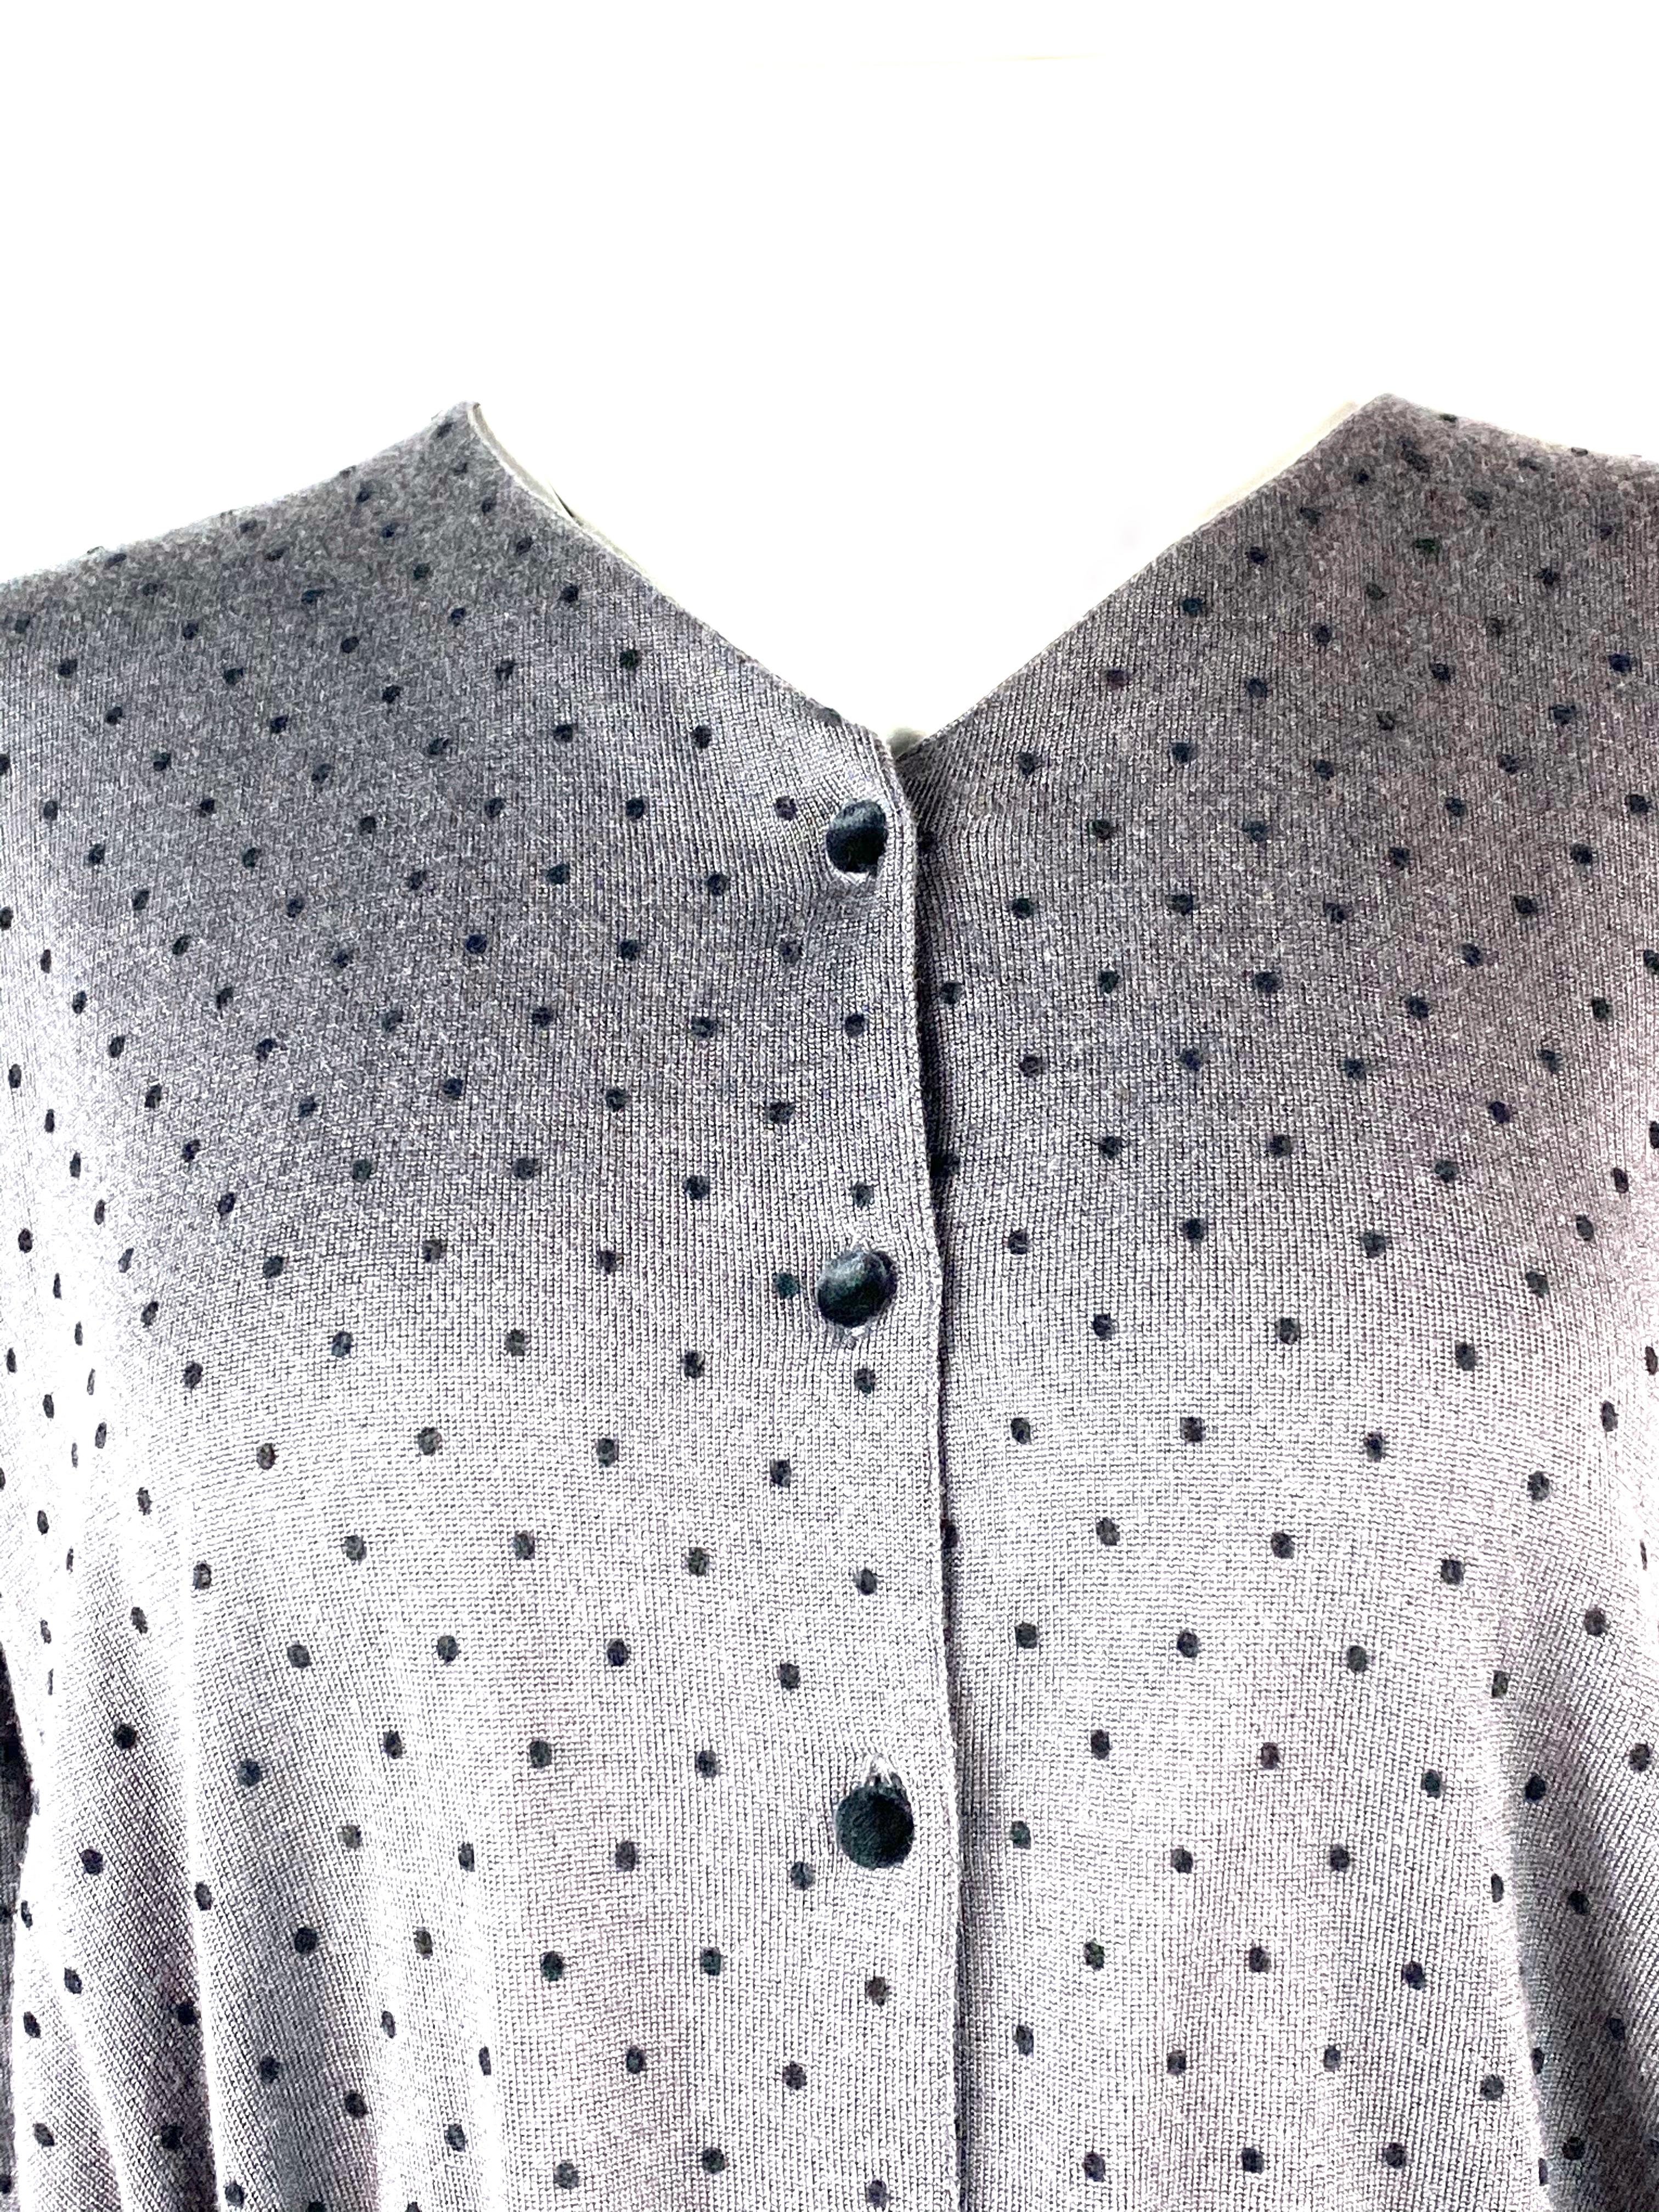 LOUIS VUITTON Black and Grey Polka Dot Cashmere Cardigan Sweater w/ Buttons and Belt

Product detail:
Size M
Grey cashmere with black velvet polka dot 
Seven black velvet buttons front closure
Featuring sewn belt detail with antique gold tone Louis